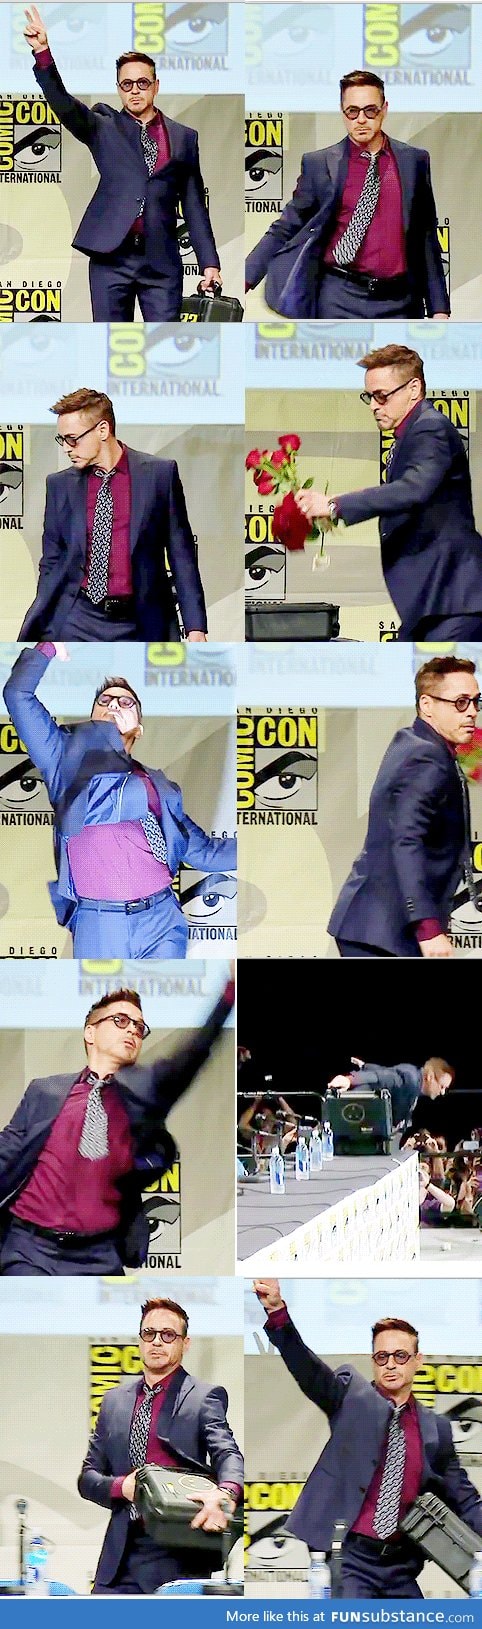 RDJ fabulously threw roses at his fans at comic con